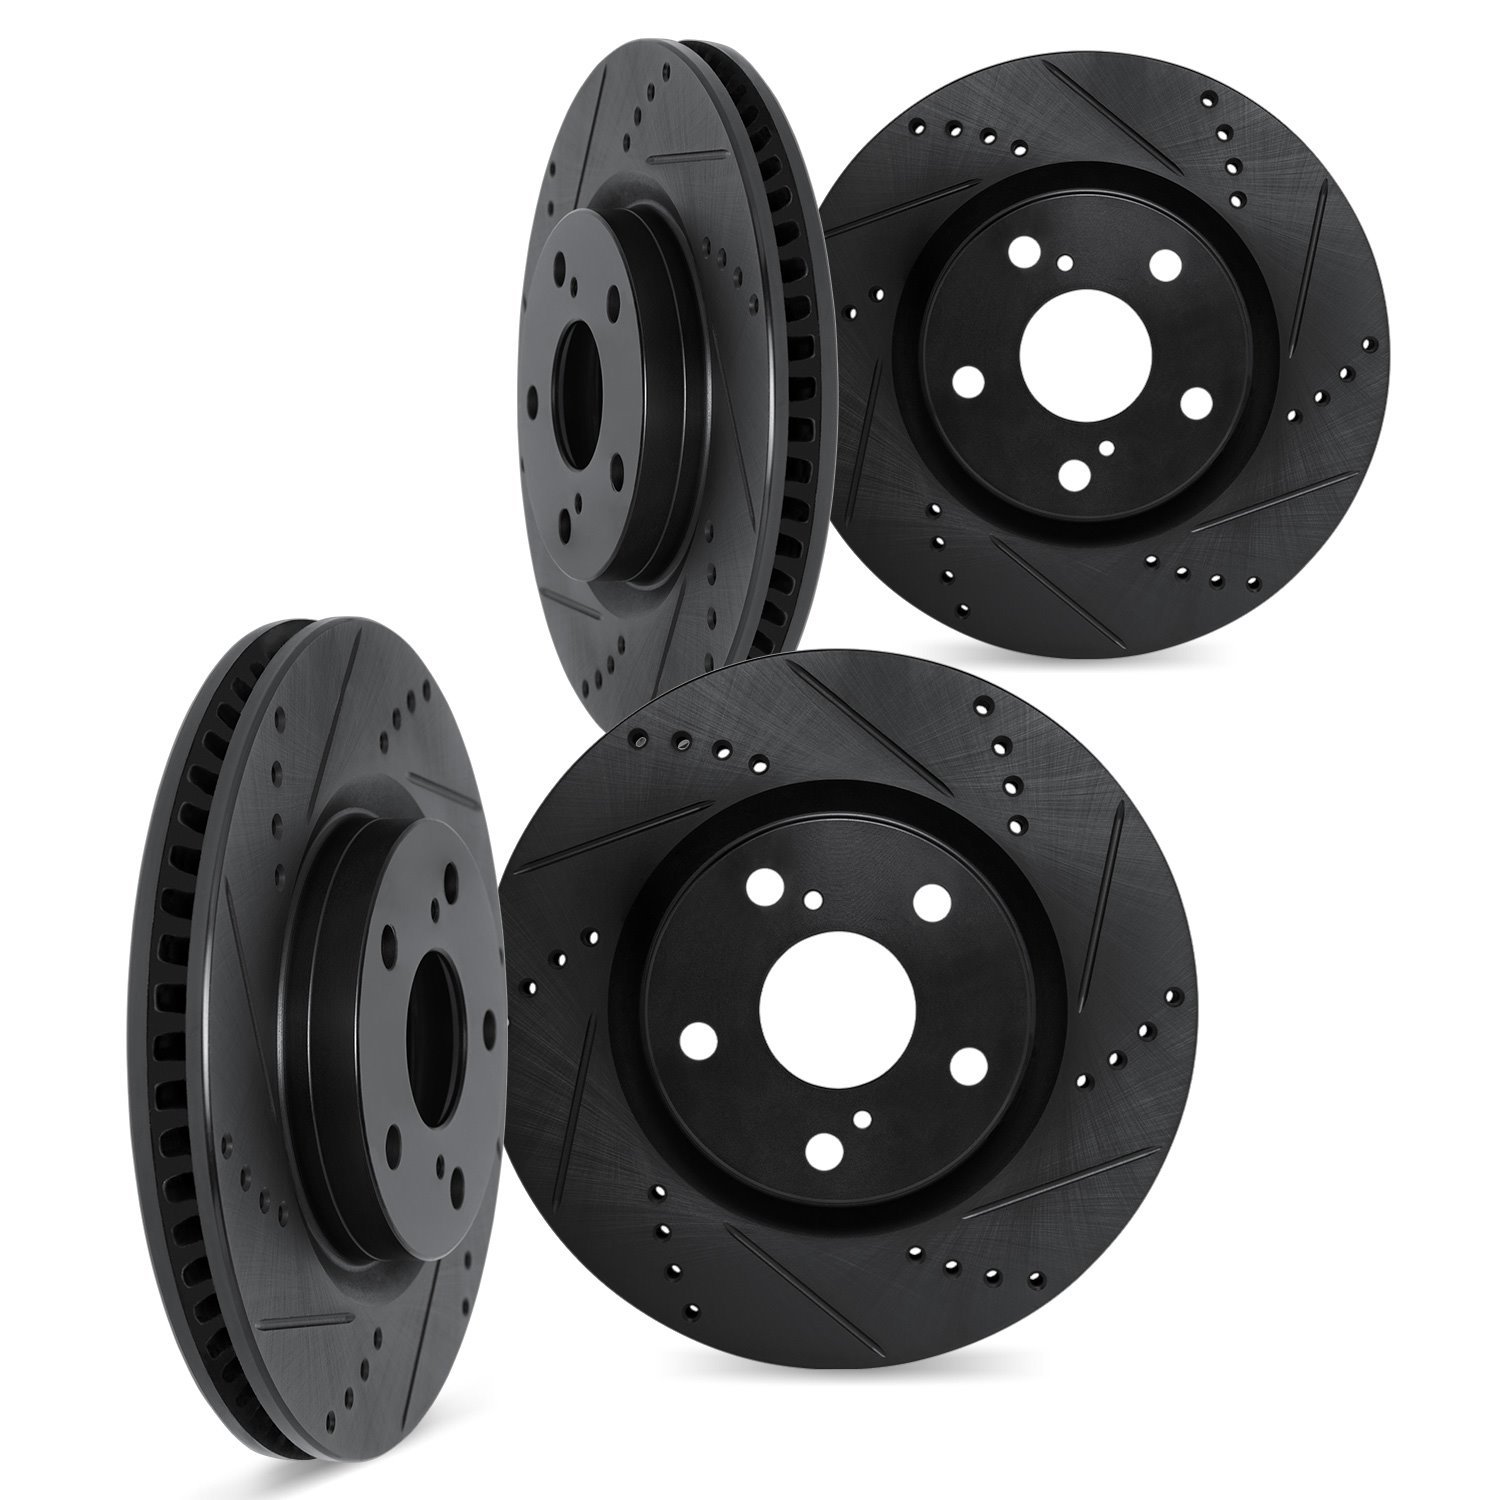 8004-42006 Drilled/Slotted Brake Rotors [Black], Fits Select Mopar, Position: Front and Rear